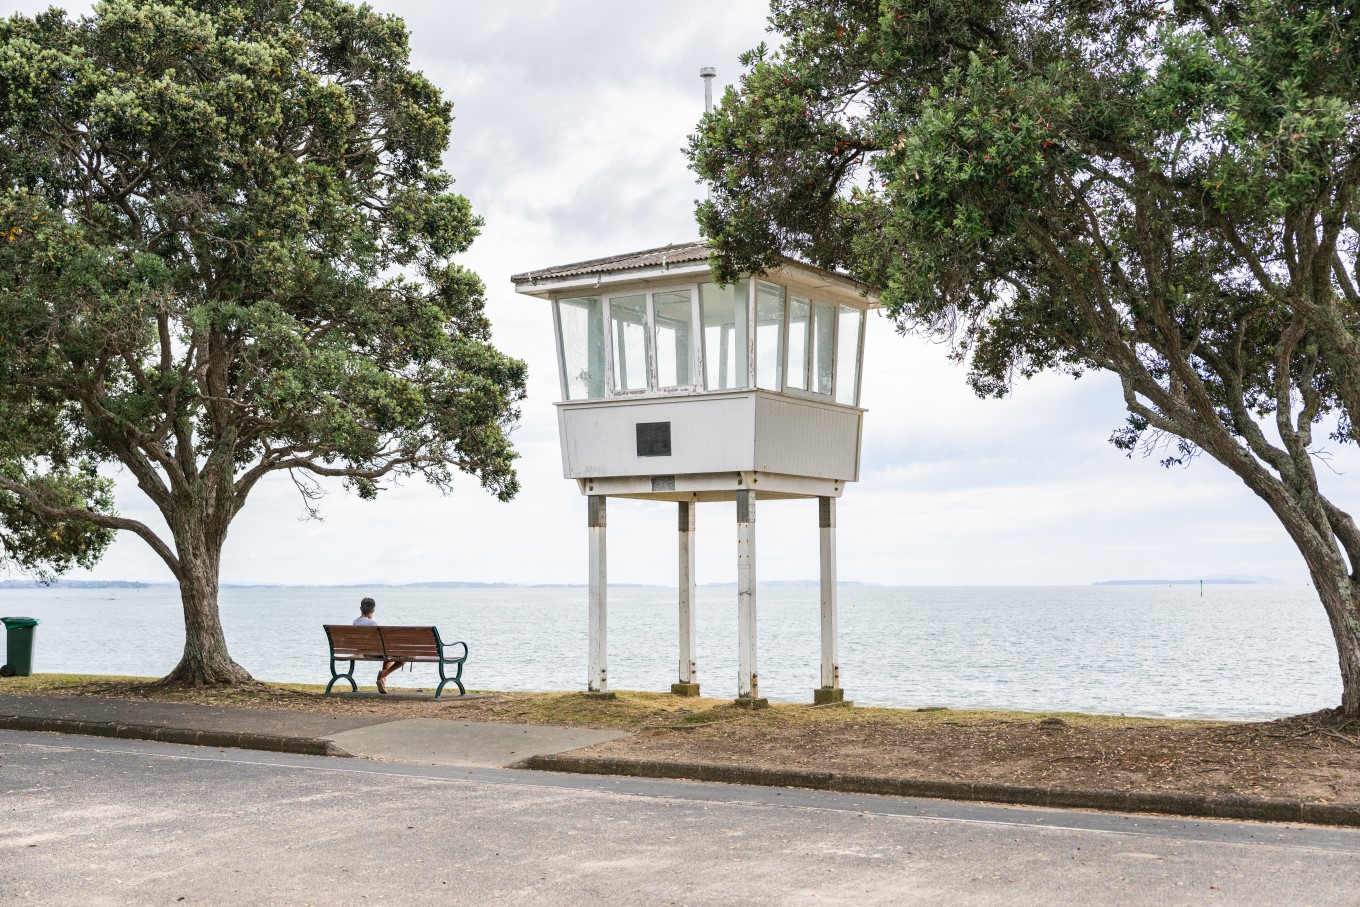 The memorial starting tower at Narrow Neck Beach in Devonport honours members of the Wakatere Boating Club who lost their lives in WWII.